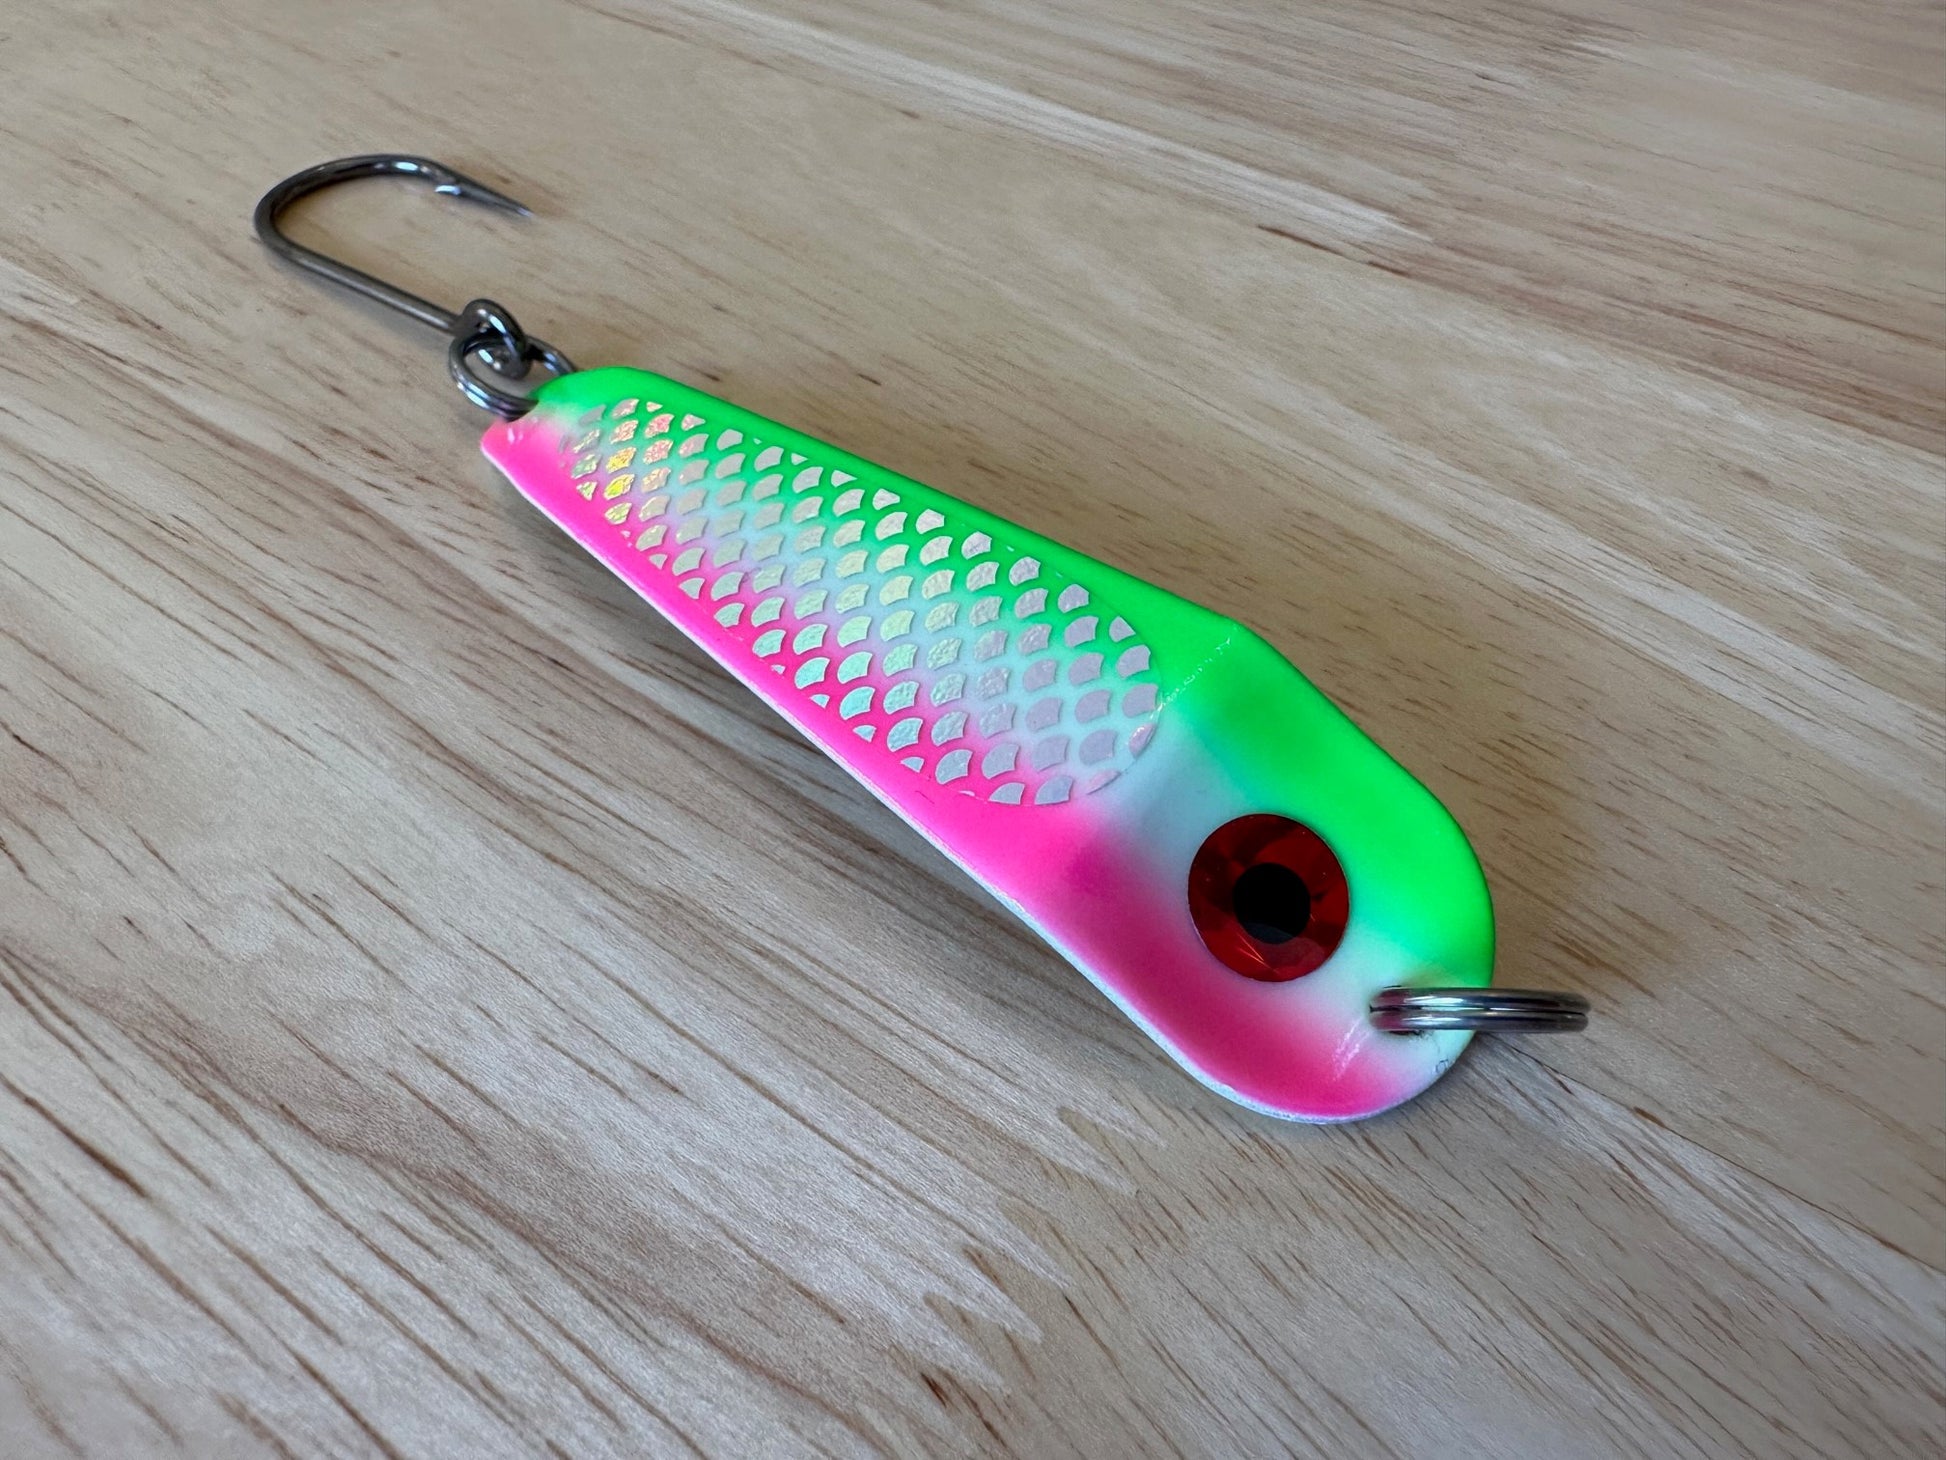 I'd sure love an inkling as to why bass seem to like pink lures in